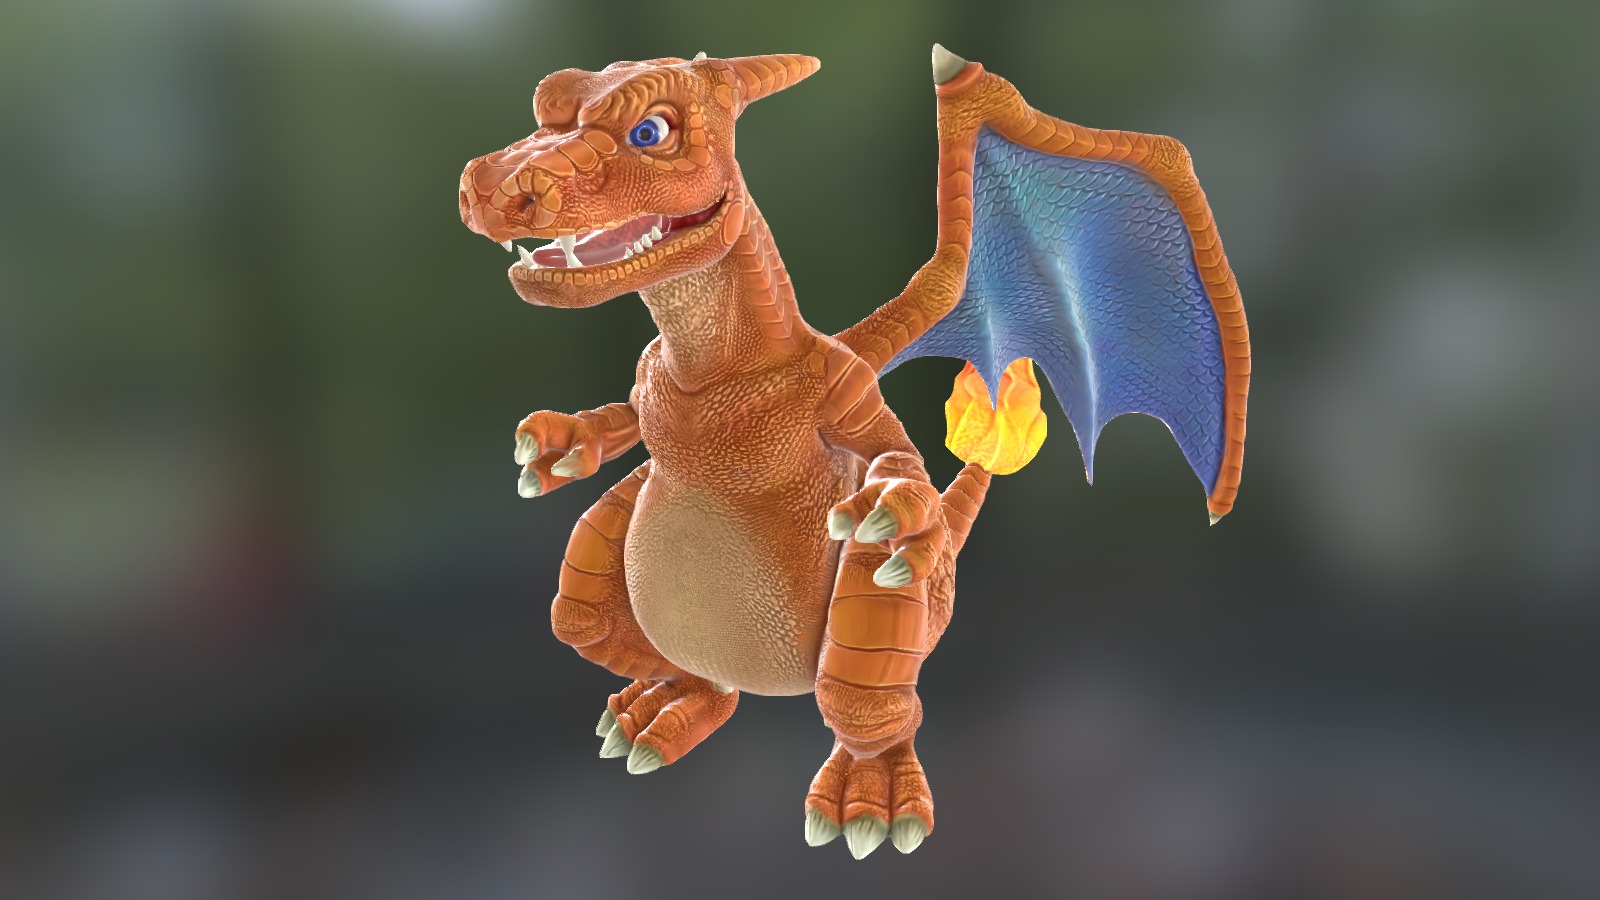 Fan-made sculpt of the Pokemon Charizard in ZBrush. Originally sculpted in 2012, textured in Substance in 2015 3d model